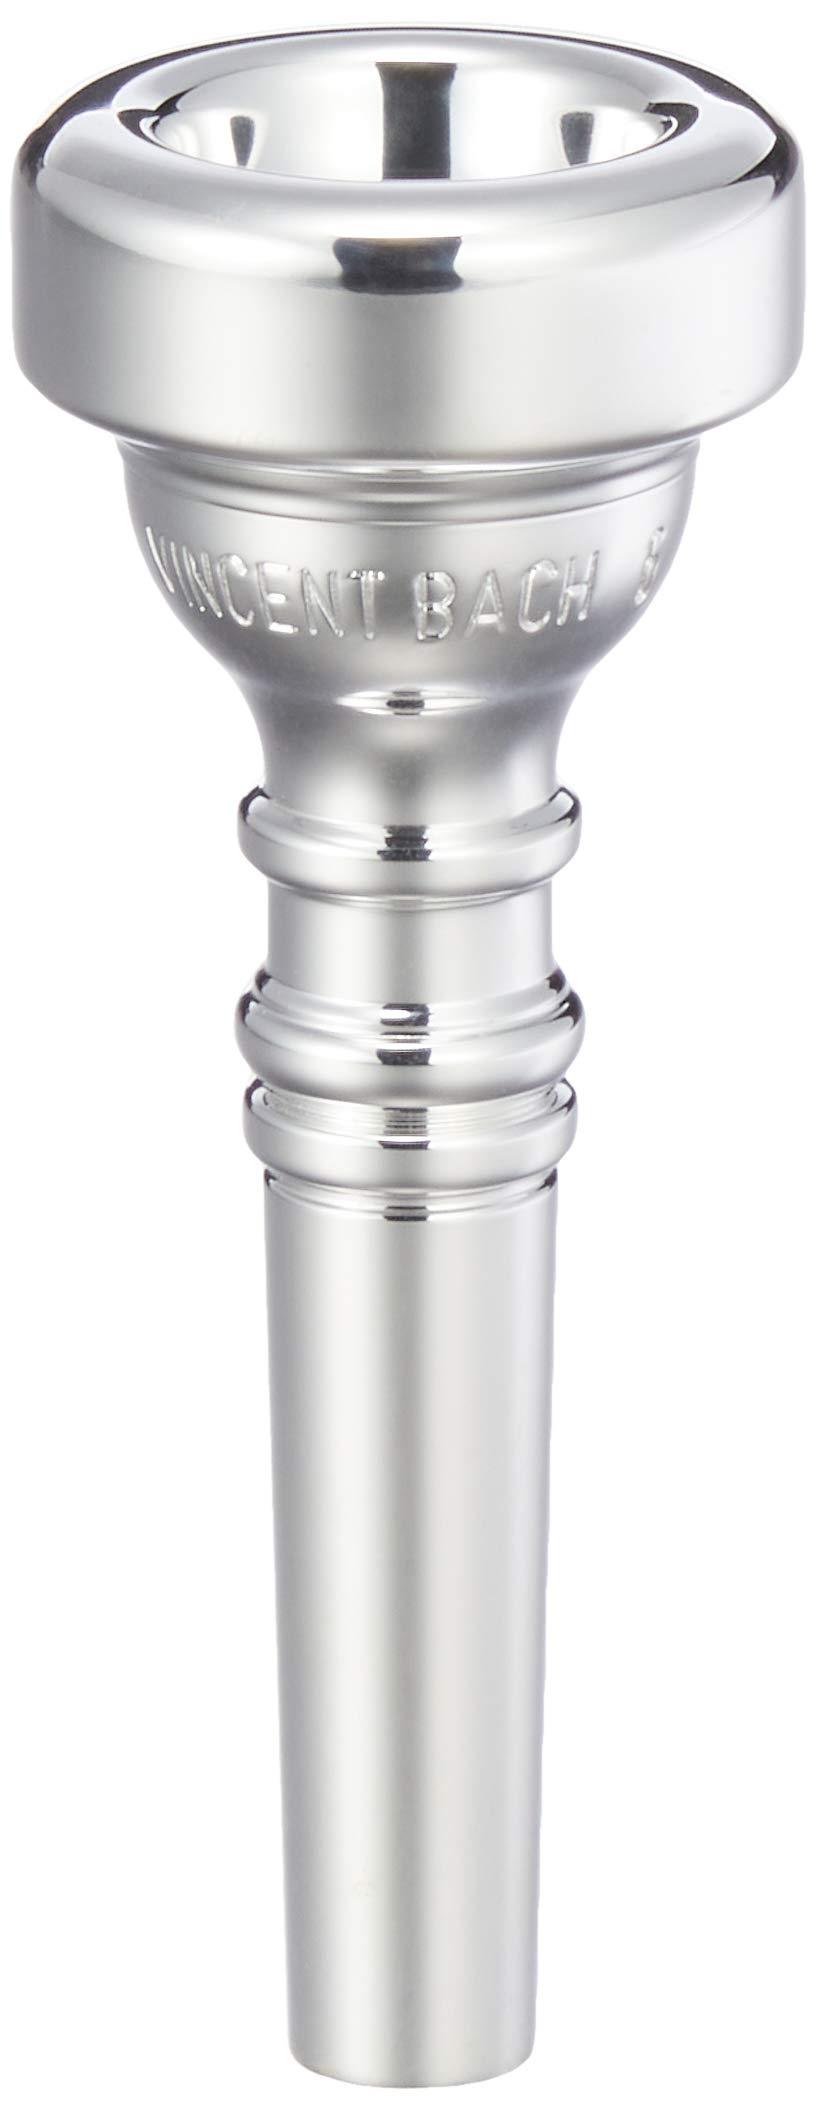 Bach 3496 Silver Plated 6 Cup Cornet Mouthpiece, Deep